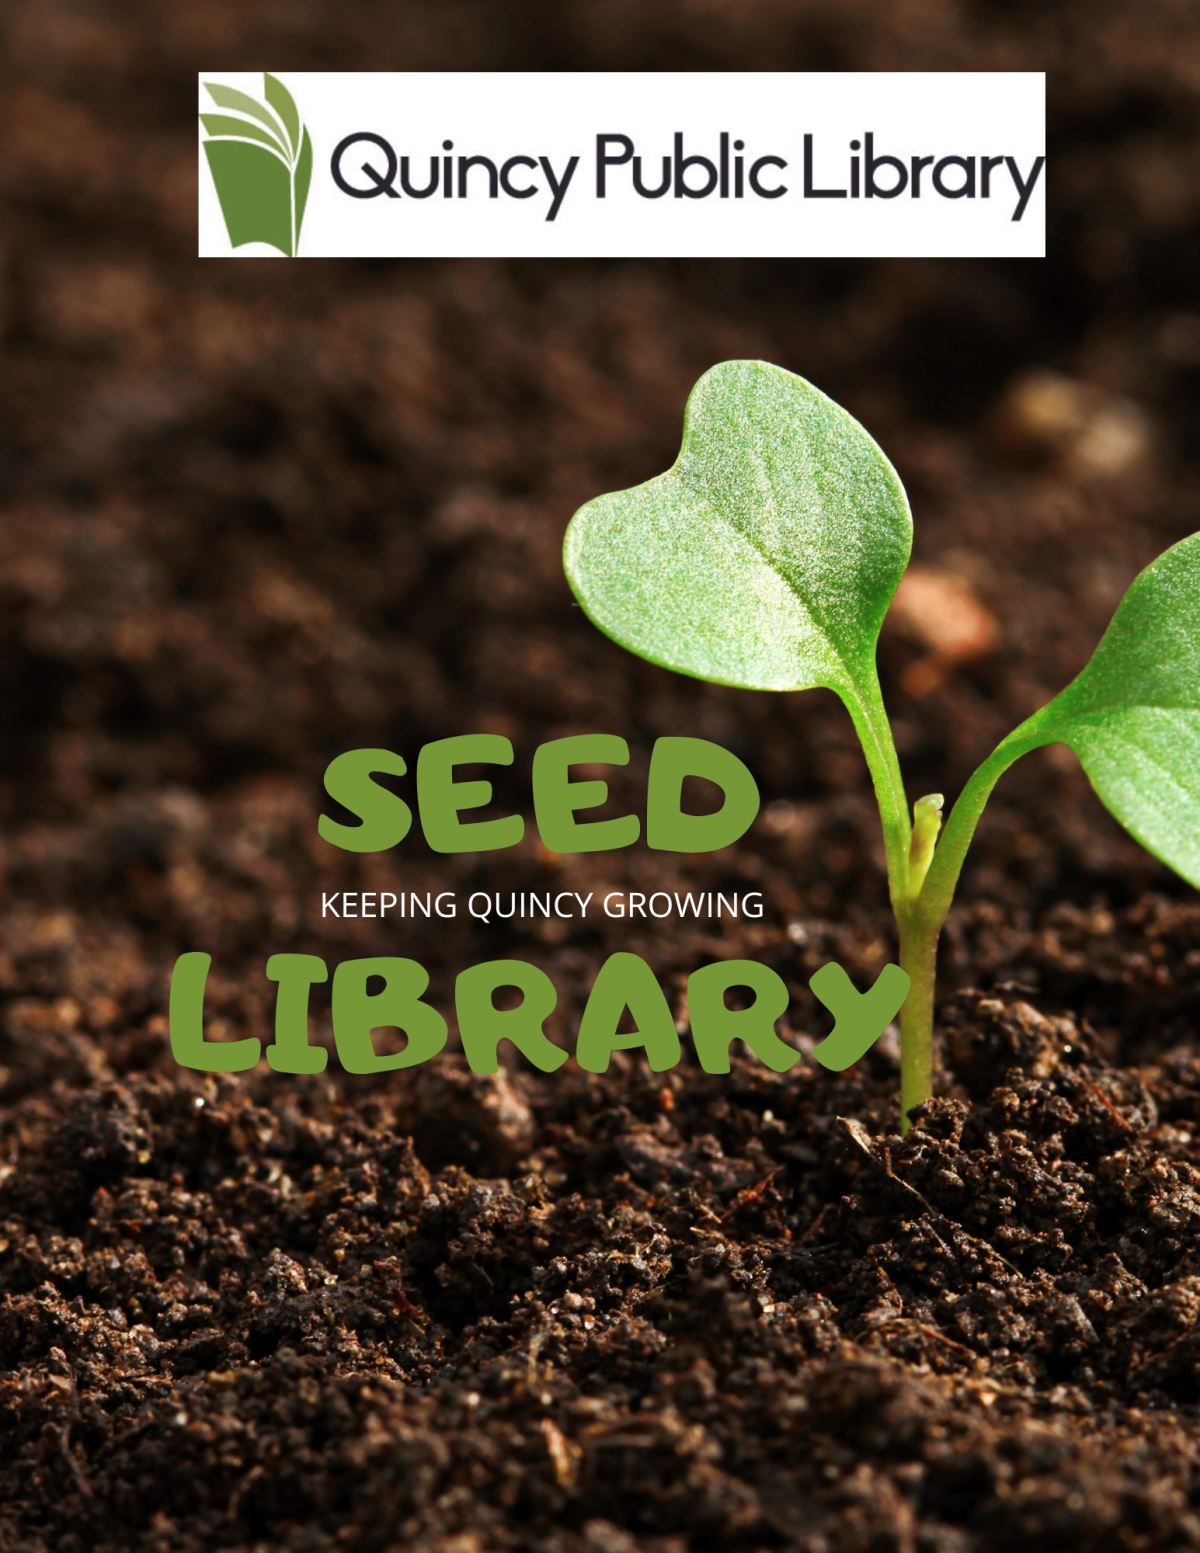 Photo of a seedling with QPL logo and the words "seed library: keeping Quincy growing"